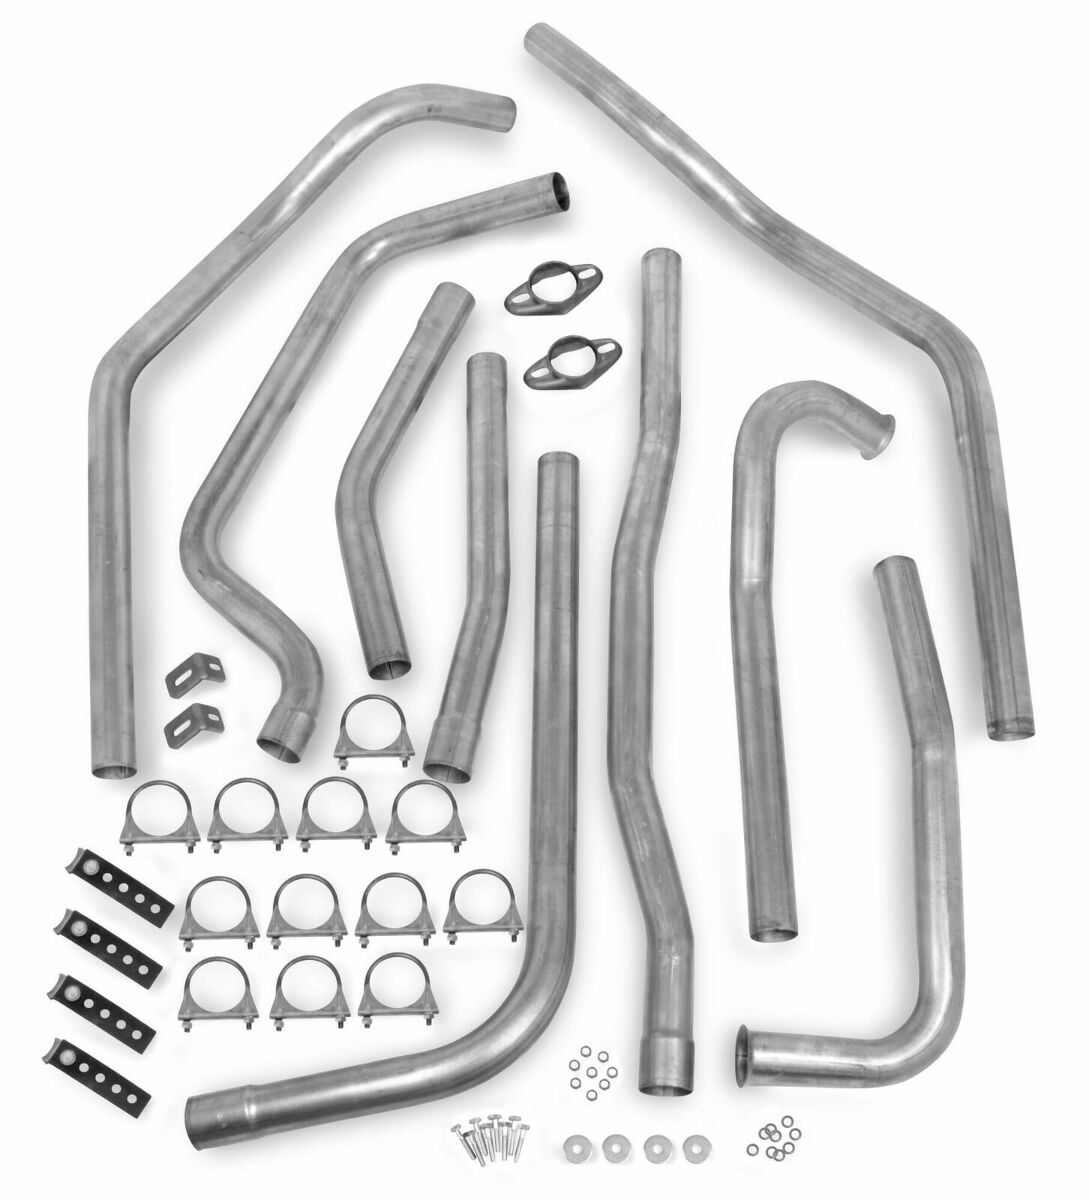 Fits 1965-74 Ford F-250 Header Back Exhaust System 16562HKR-Open Box (condition)